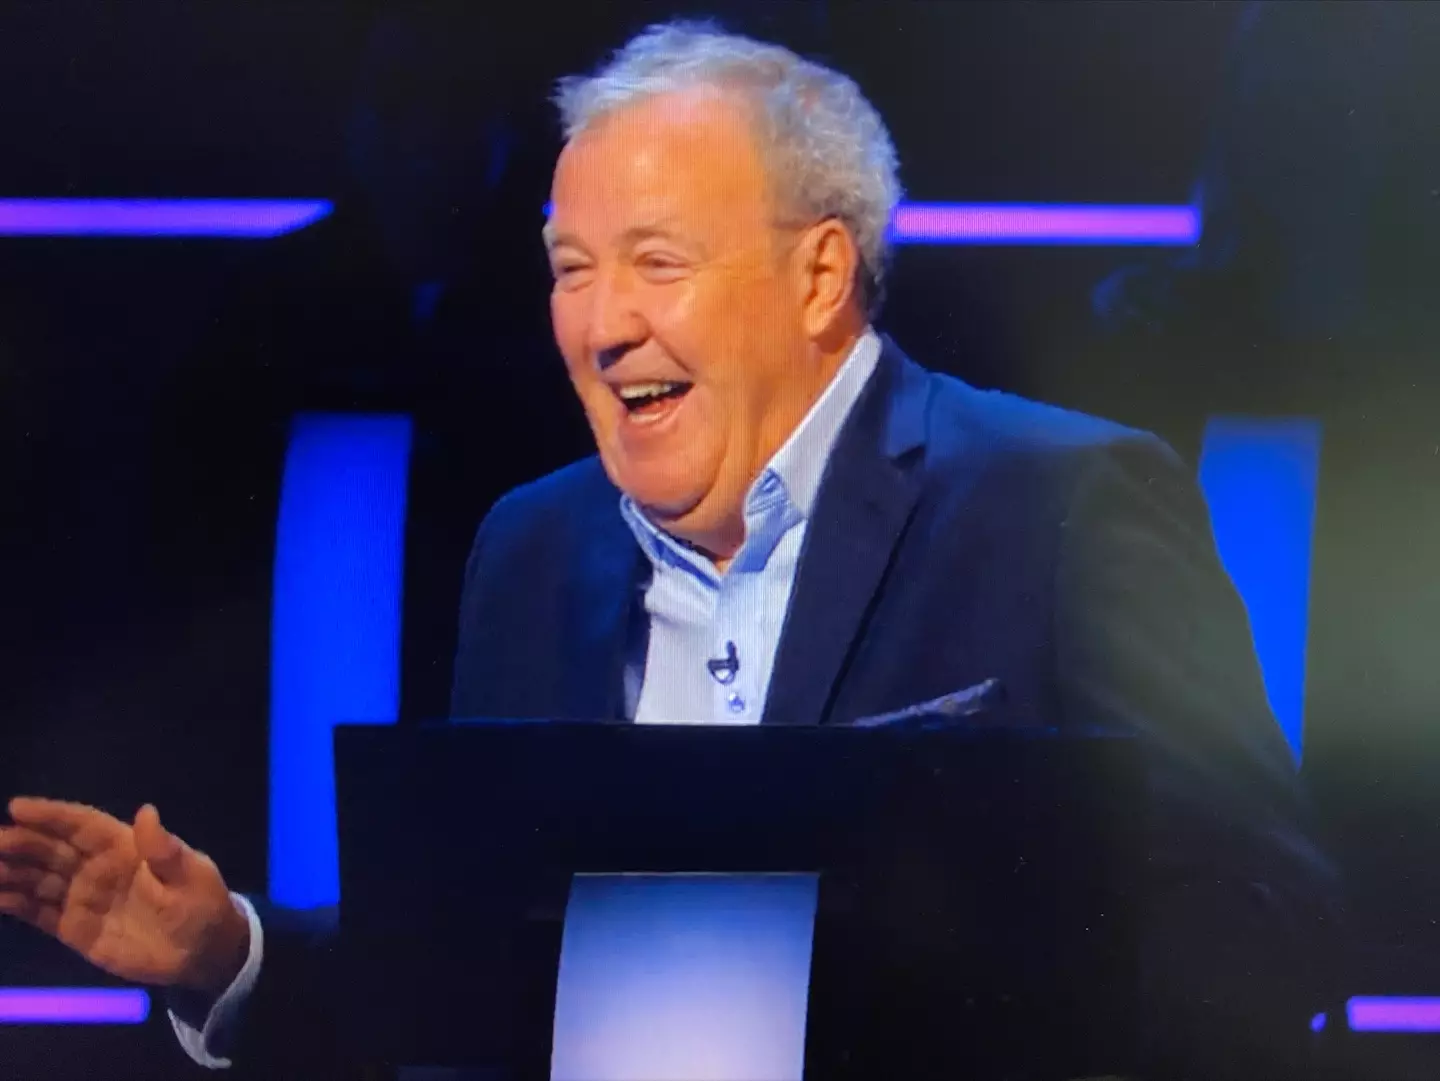 Show host Jeremy Clarkson joked that he'd see Maria 'in an hour' to film for next week's show.